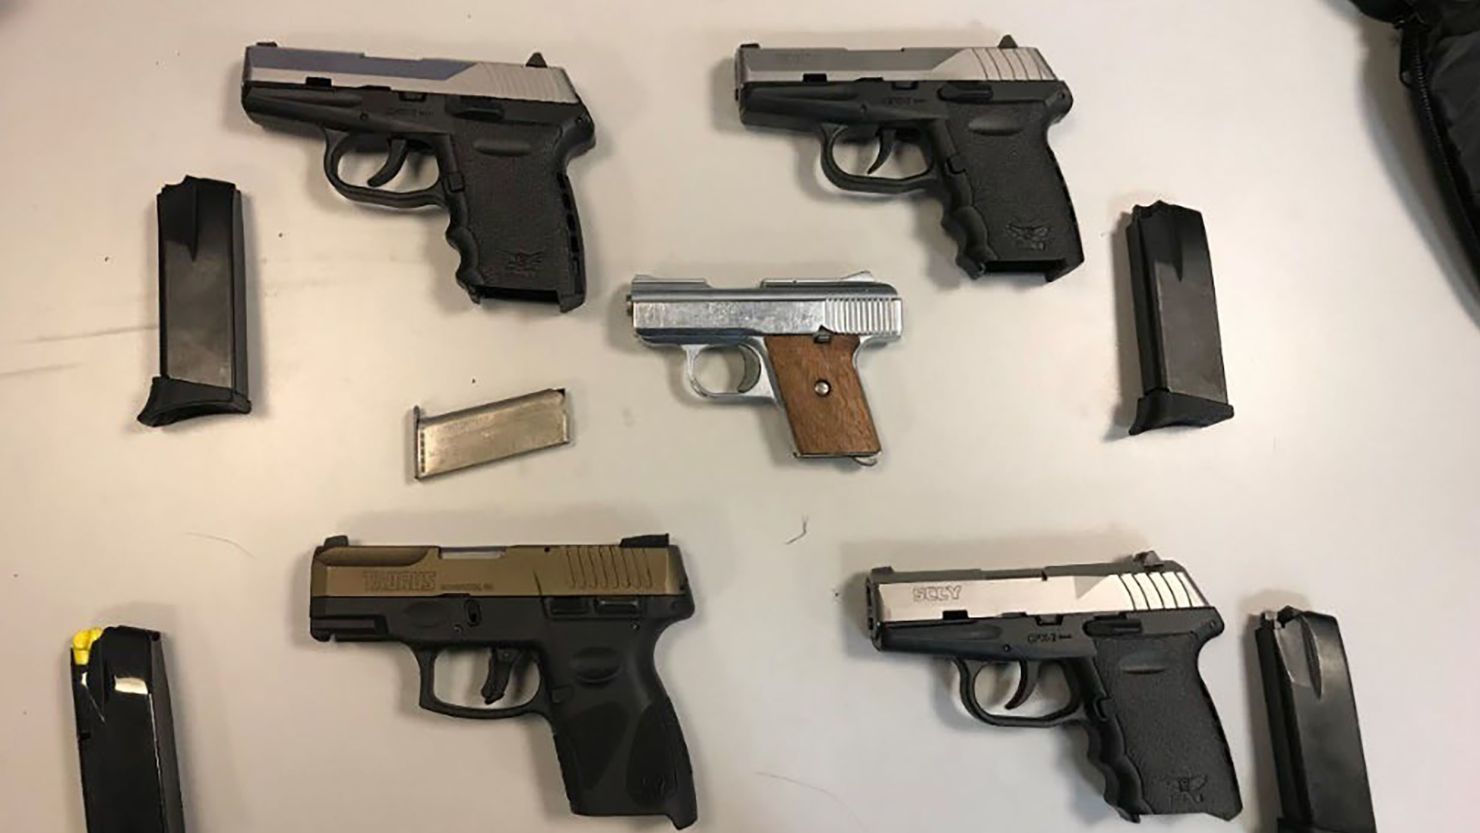 4 Gun Traffickers Charged In New York Marking The States 1st Prosecution Under The Bipartisan 8319